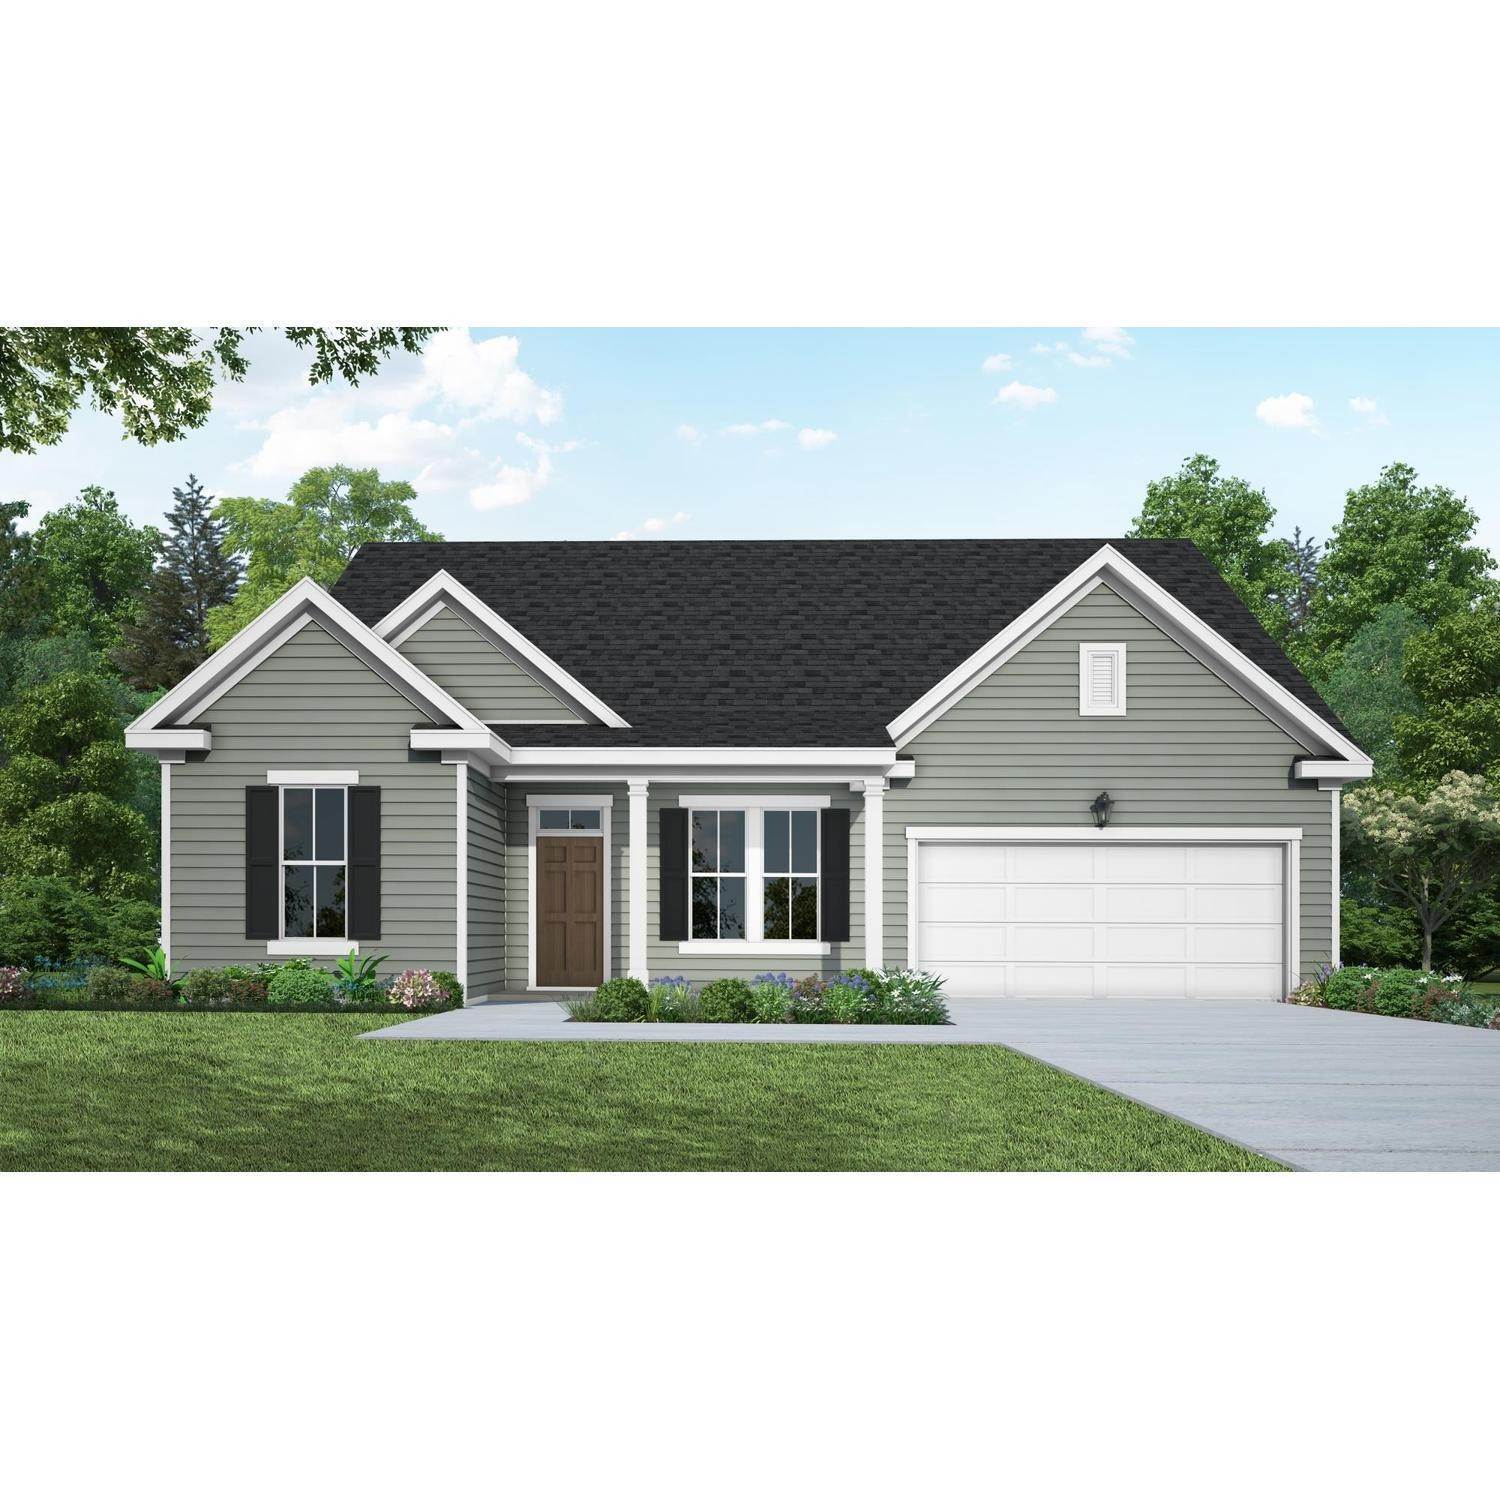 Single Family for Sale at Sinclair At Crawford Creek - Crestwood 2045 Sinclair Drive GROVETOWN, GEORGIA 30813 UNITED STATES